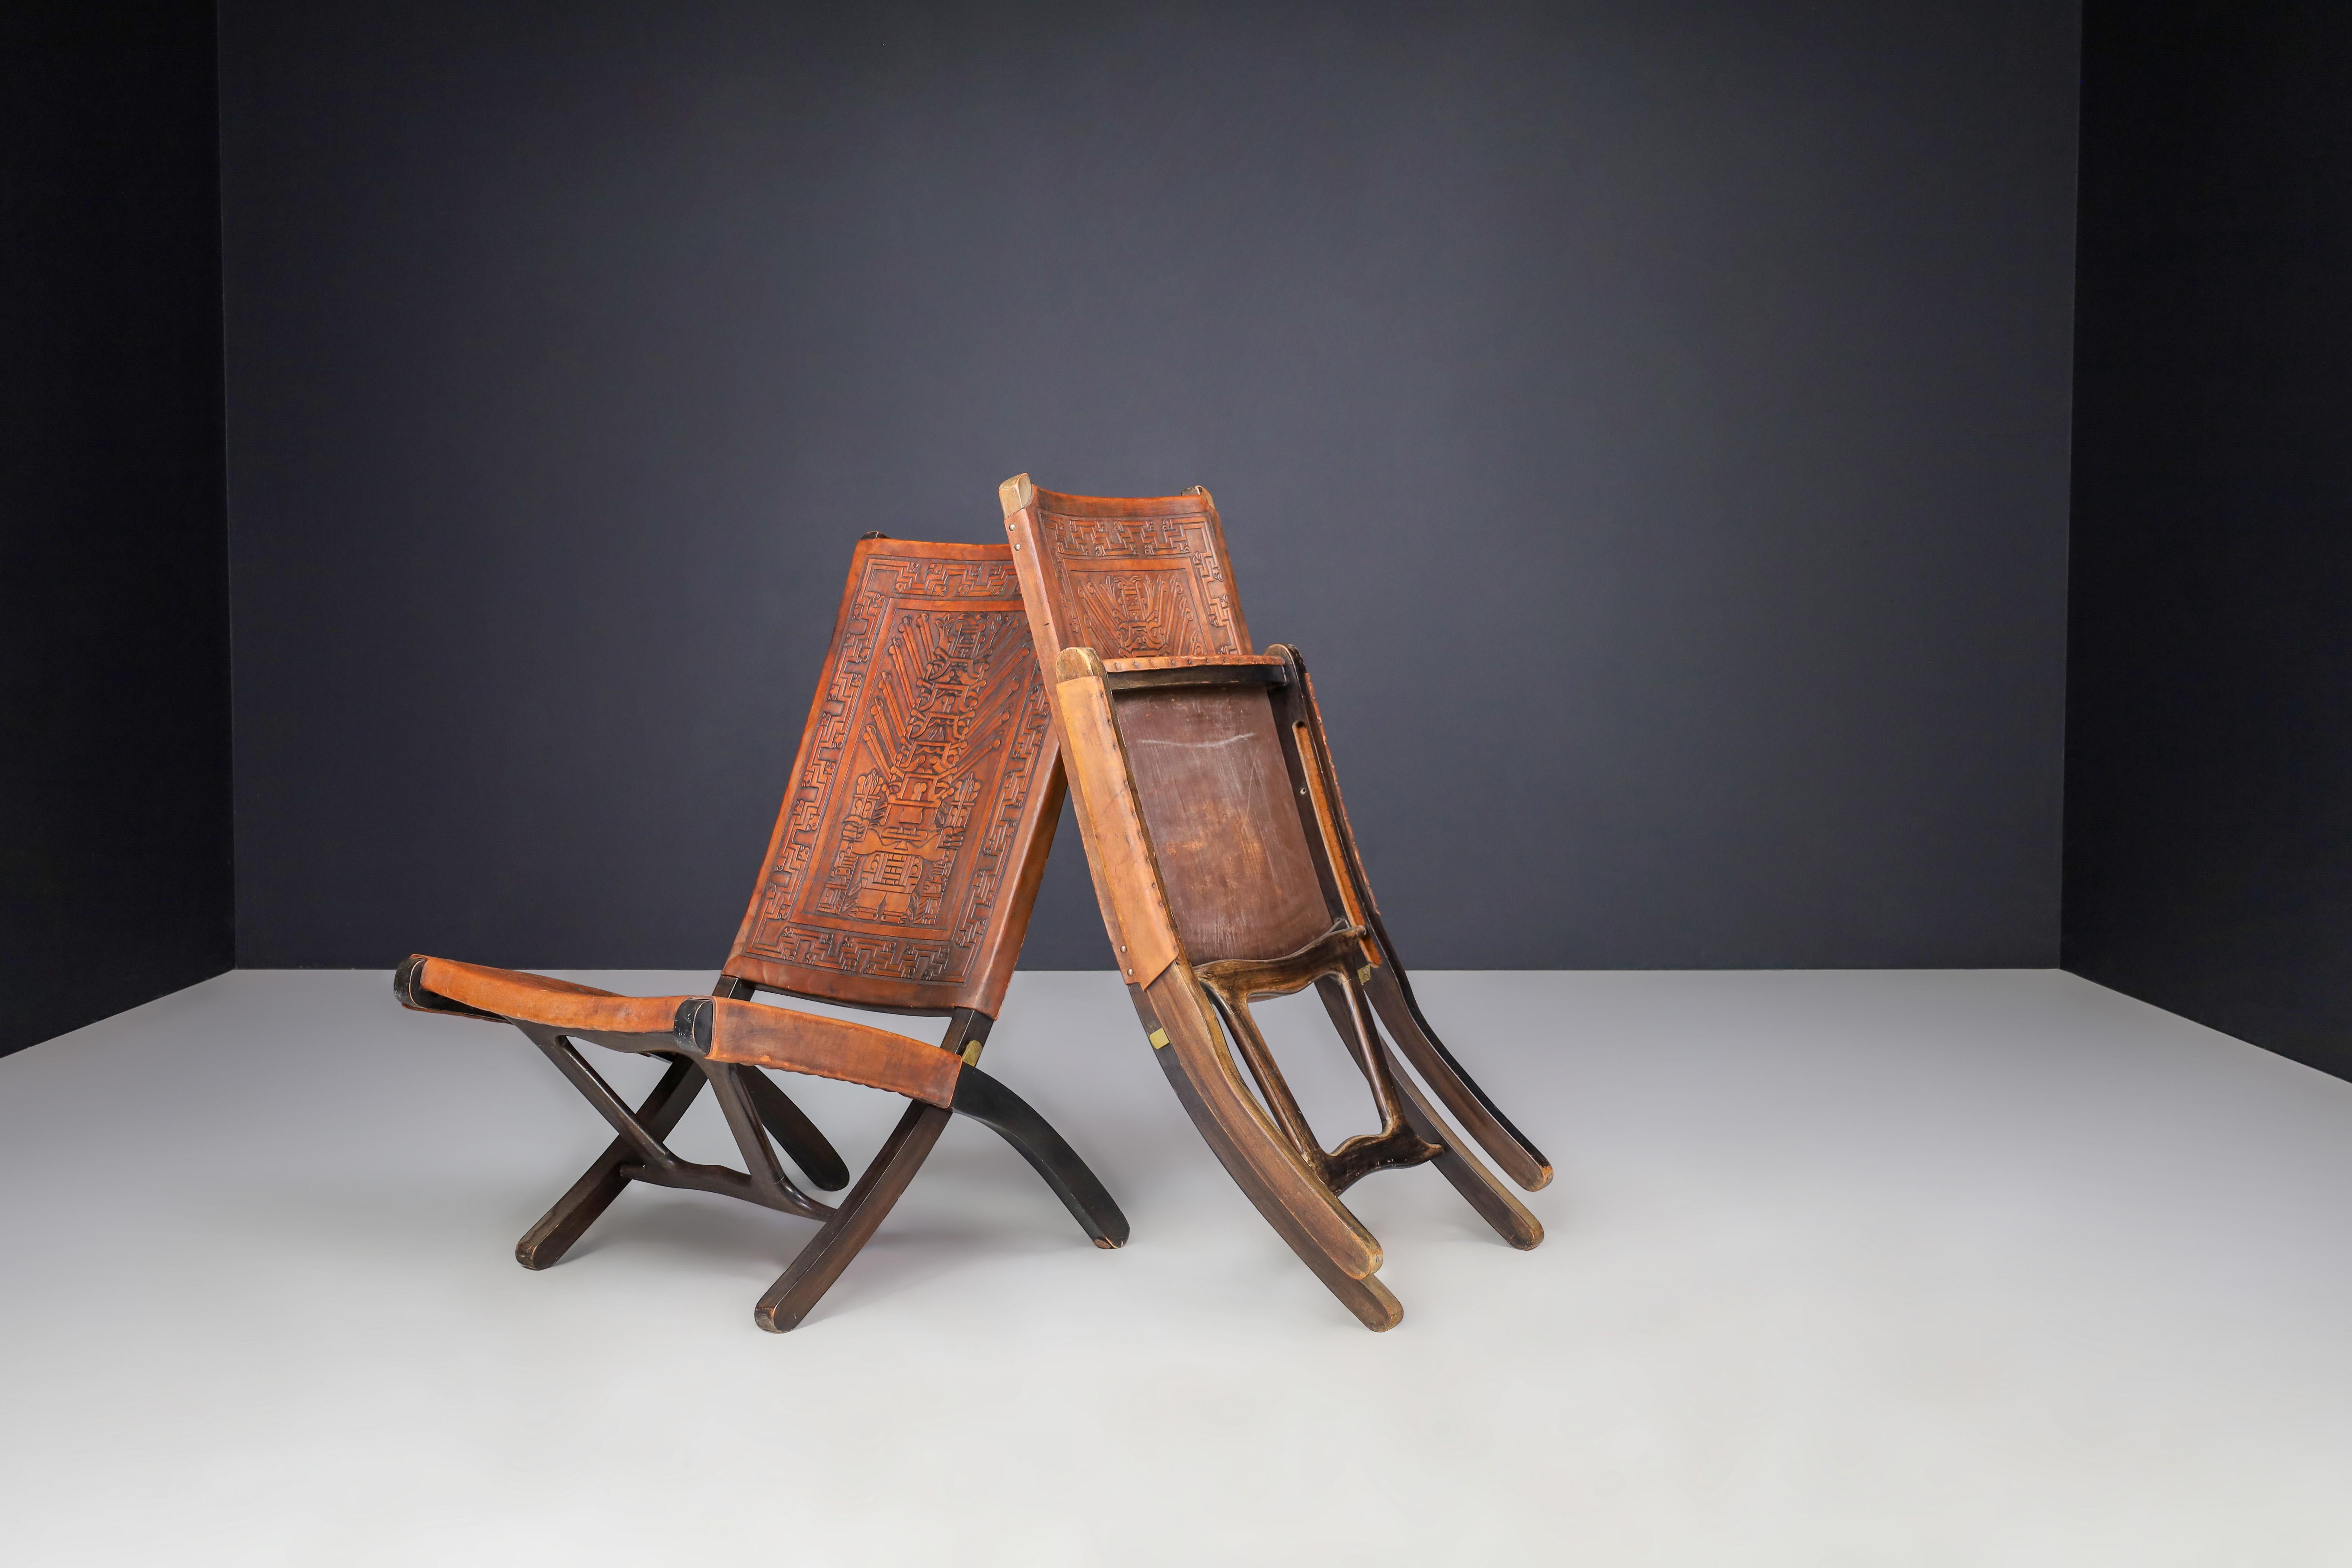 Angel I. Pazmino Cognac-colored Saddle Leather Folding Chairs Ecuador 1970s   In Good Condition For Sale In Almelo, NL